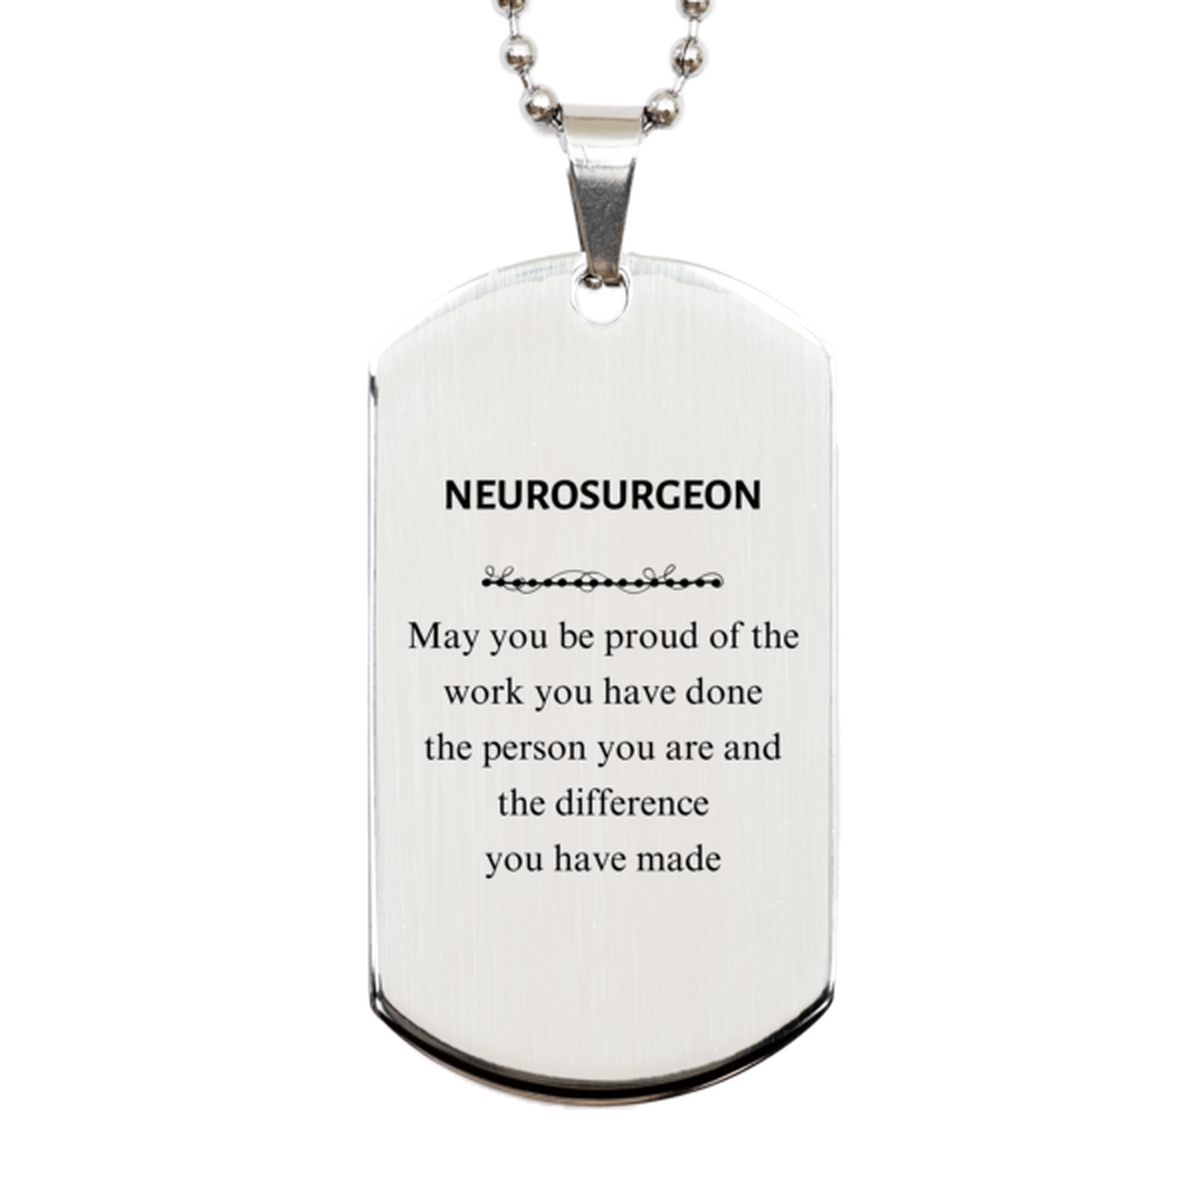 Neurosurgeon May you be proud of the work you have done, Retirement Neurosurgeon Silver Dog Tag for Colleague Appreciation Gifts Amazing for Neurosurgeon